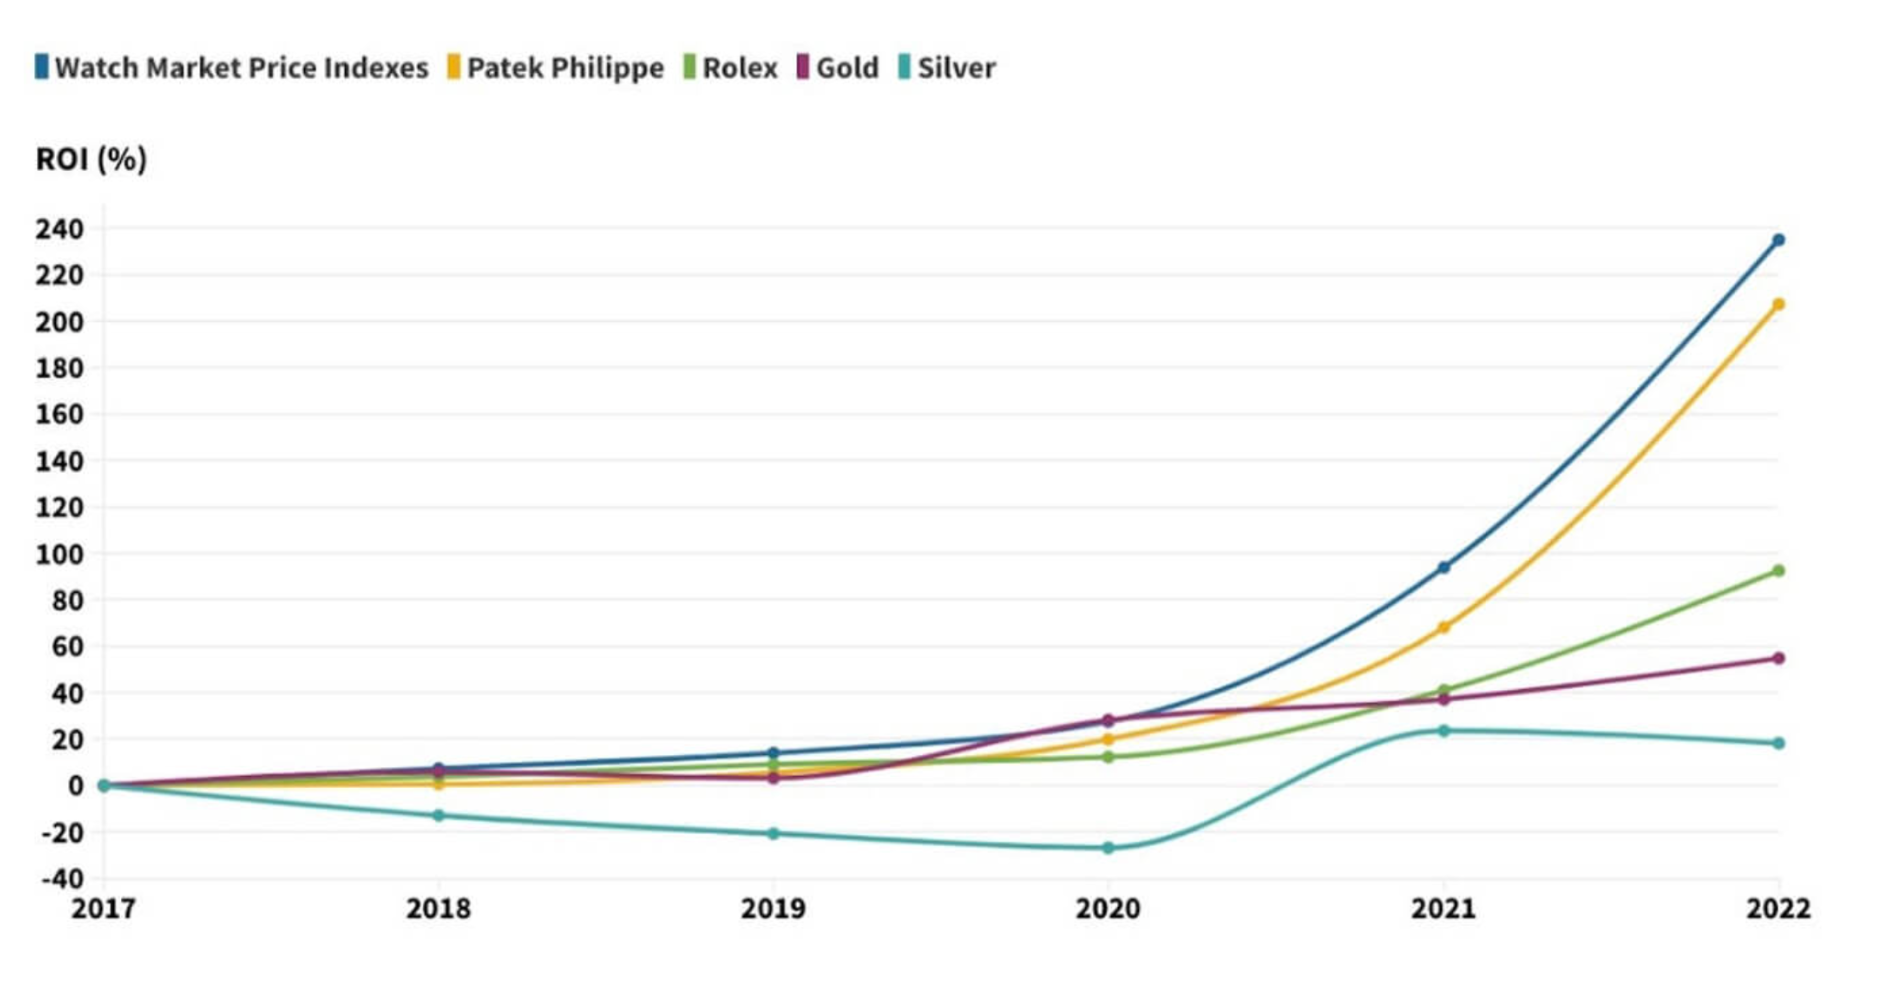 Patek Philippe and Rolex watches continue to offer investors greater ROI than gold or silver.